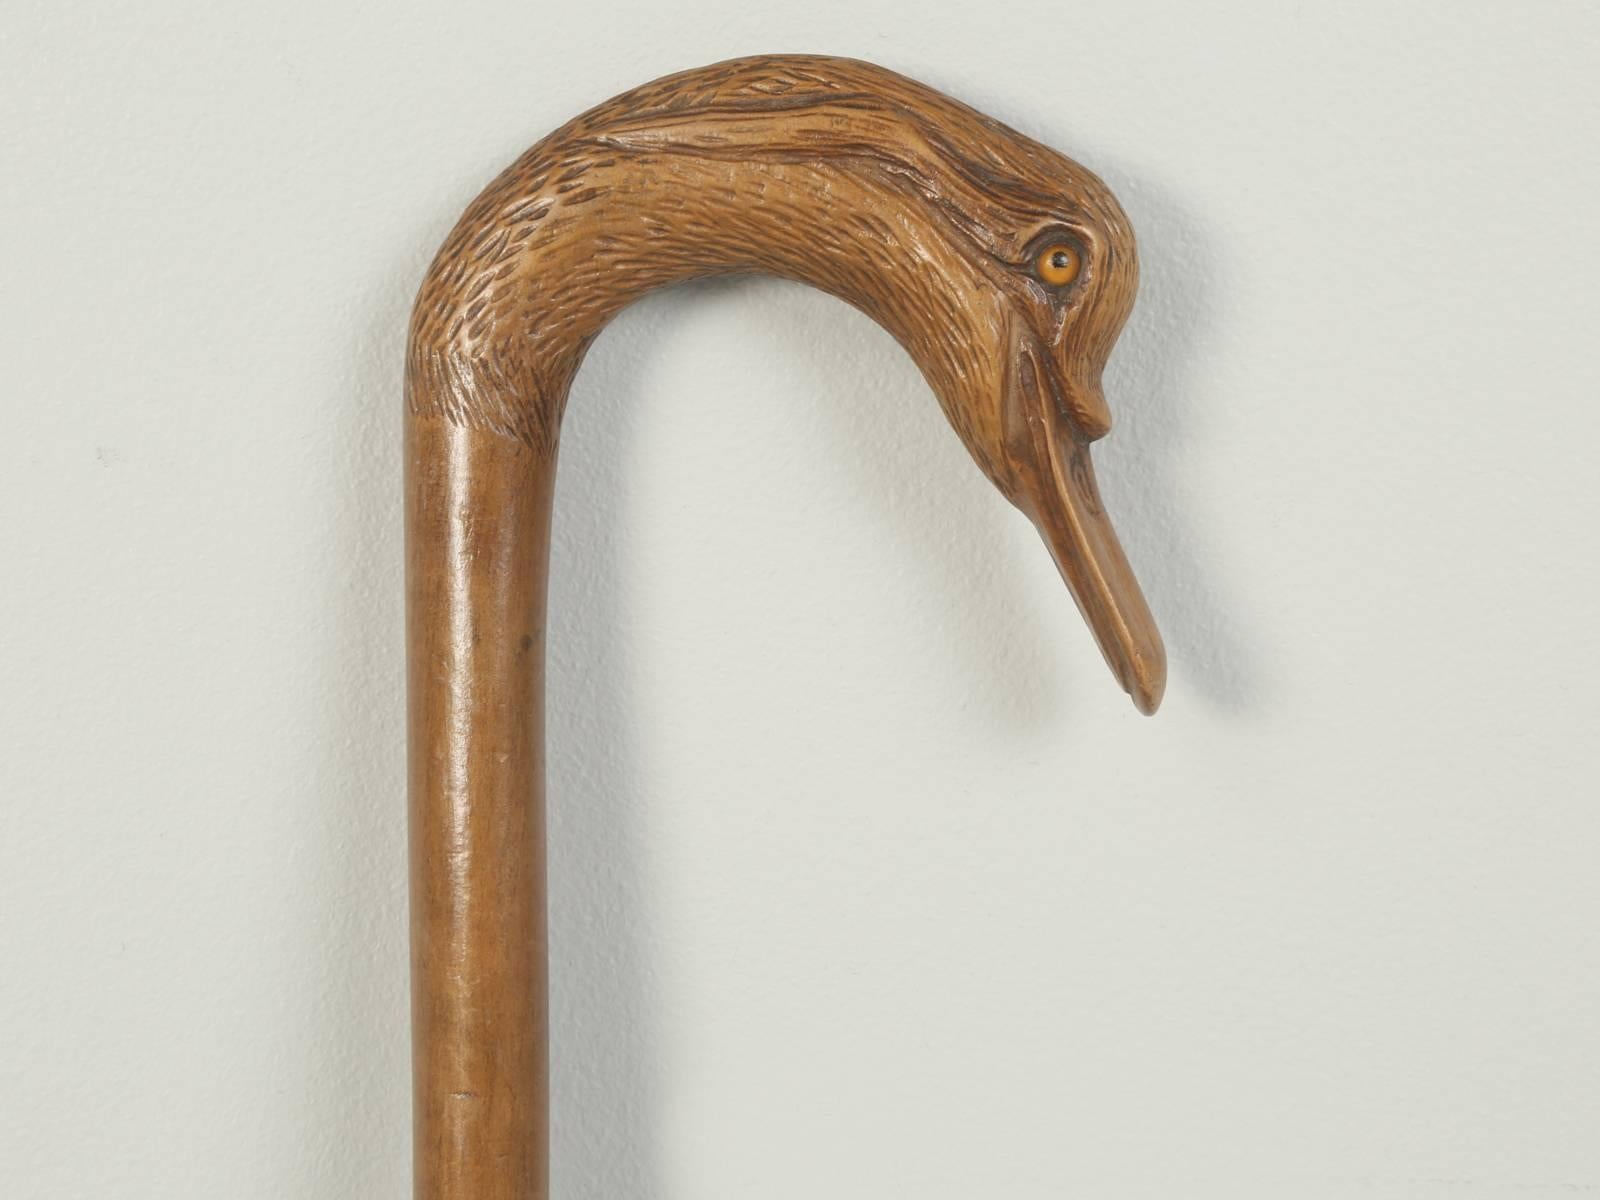 We generally associate walking sticks and canes as being used by the elderly. However, since the mid-16th century and running straight through the 1920s, canes were a decorative accessory, that anyone well-dressed just had to have. They typically